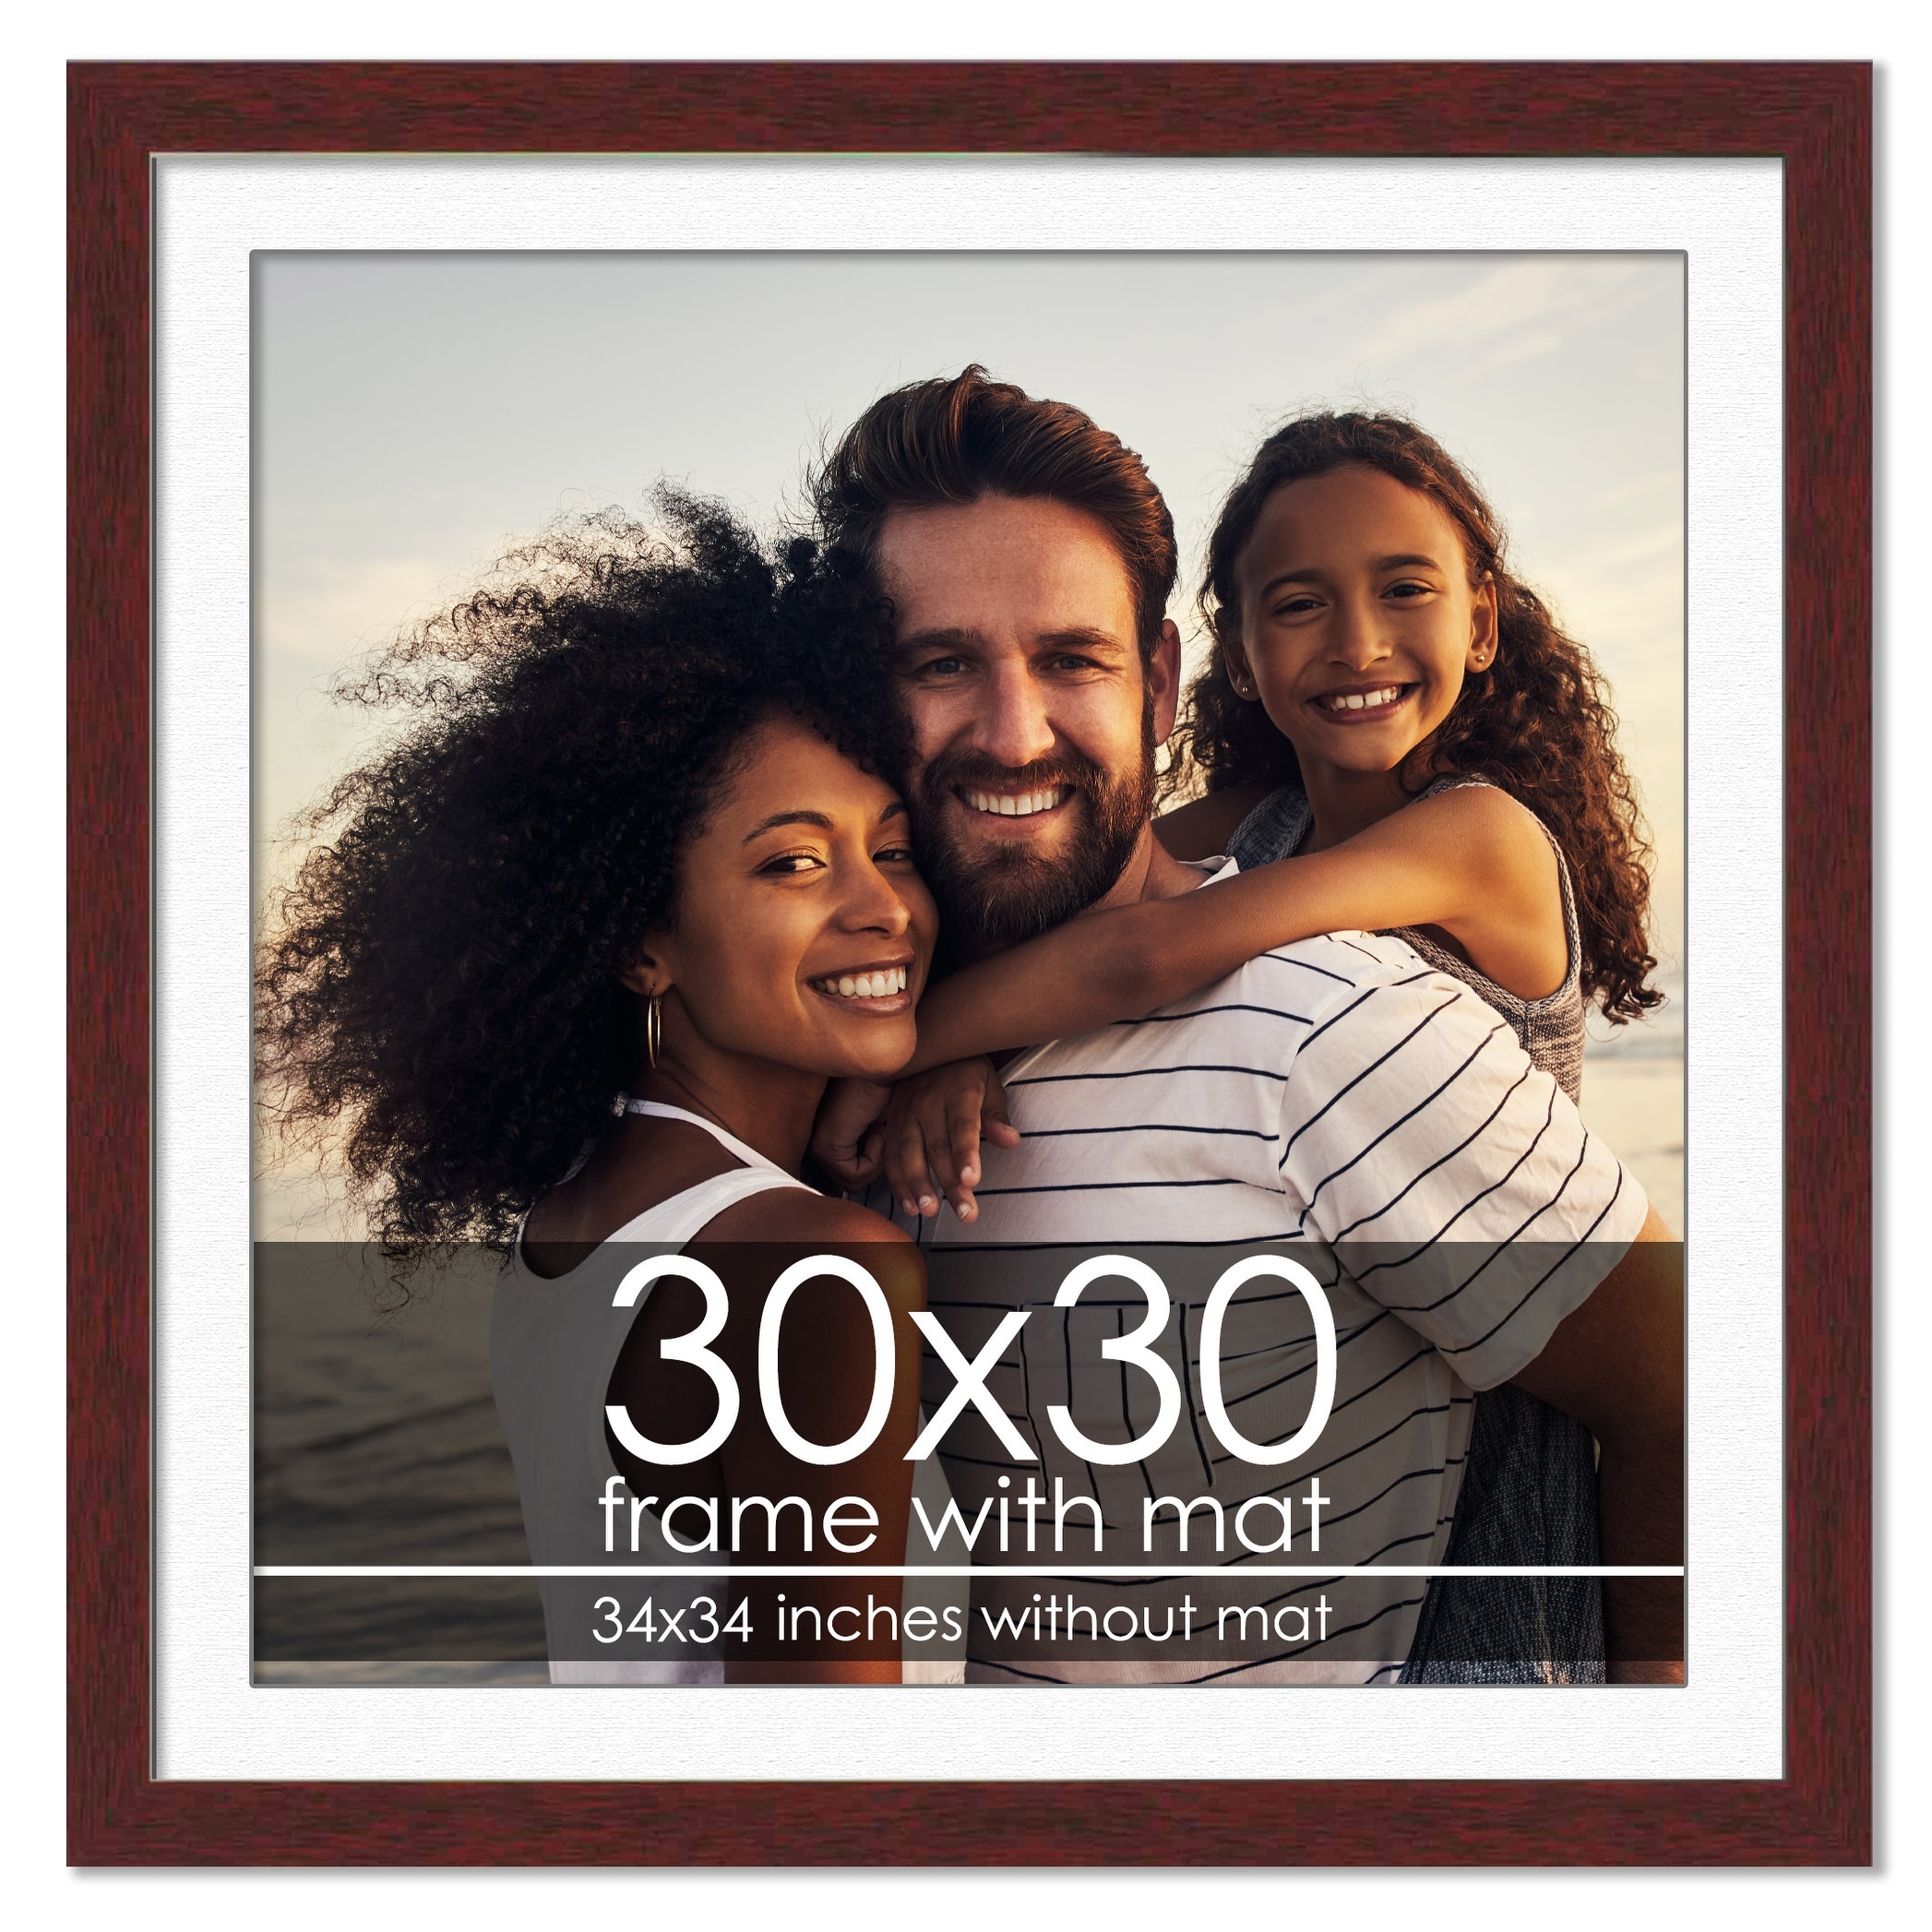 30x30 Frame with Mat - Brown 34x34 Frame Wood Made to Display Print or  Poster Measuring 30 x 30 Inches with White Photo Mat - Bed Bath & Beyond -  38578065